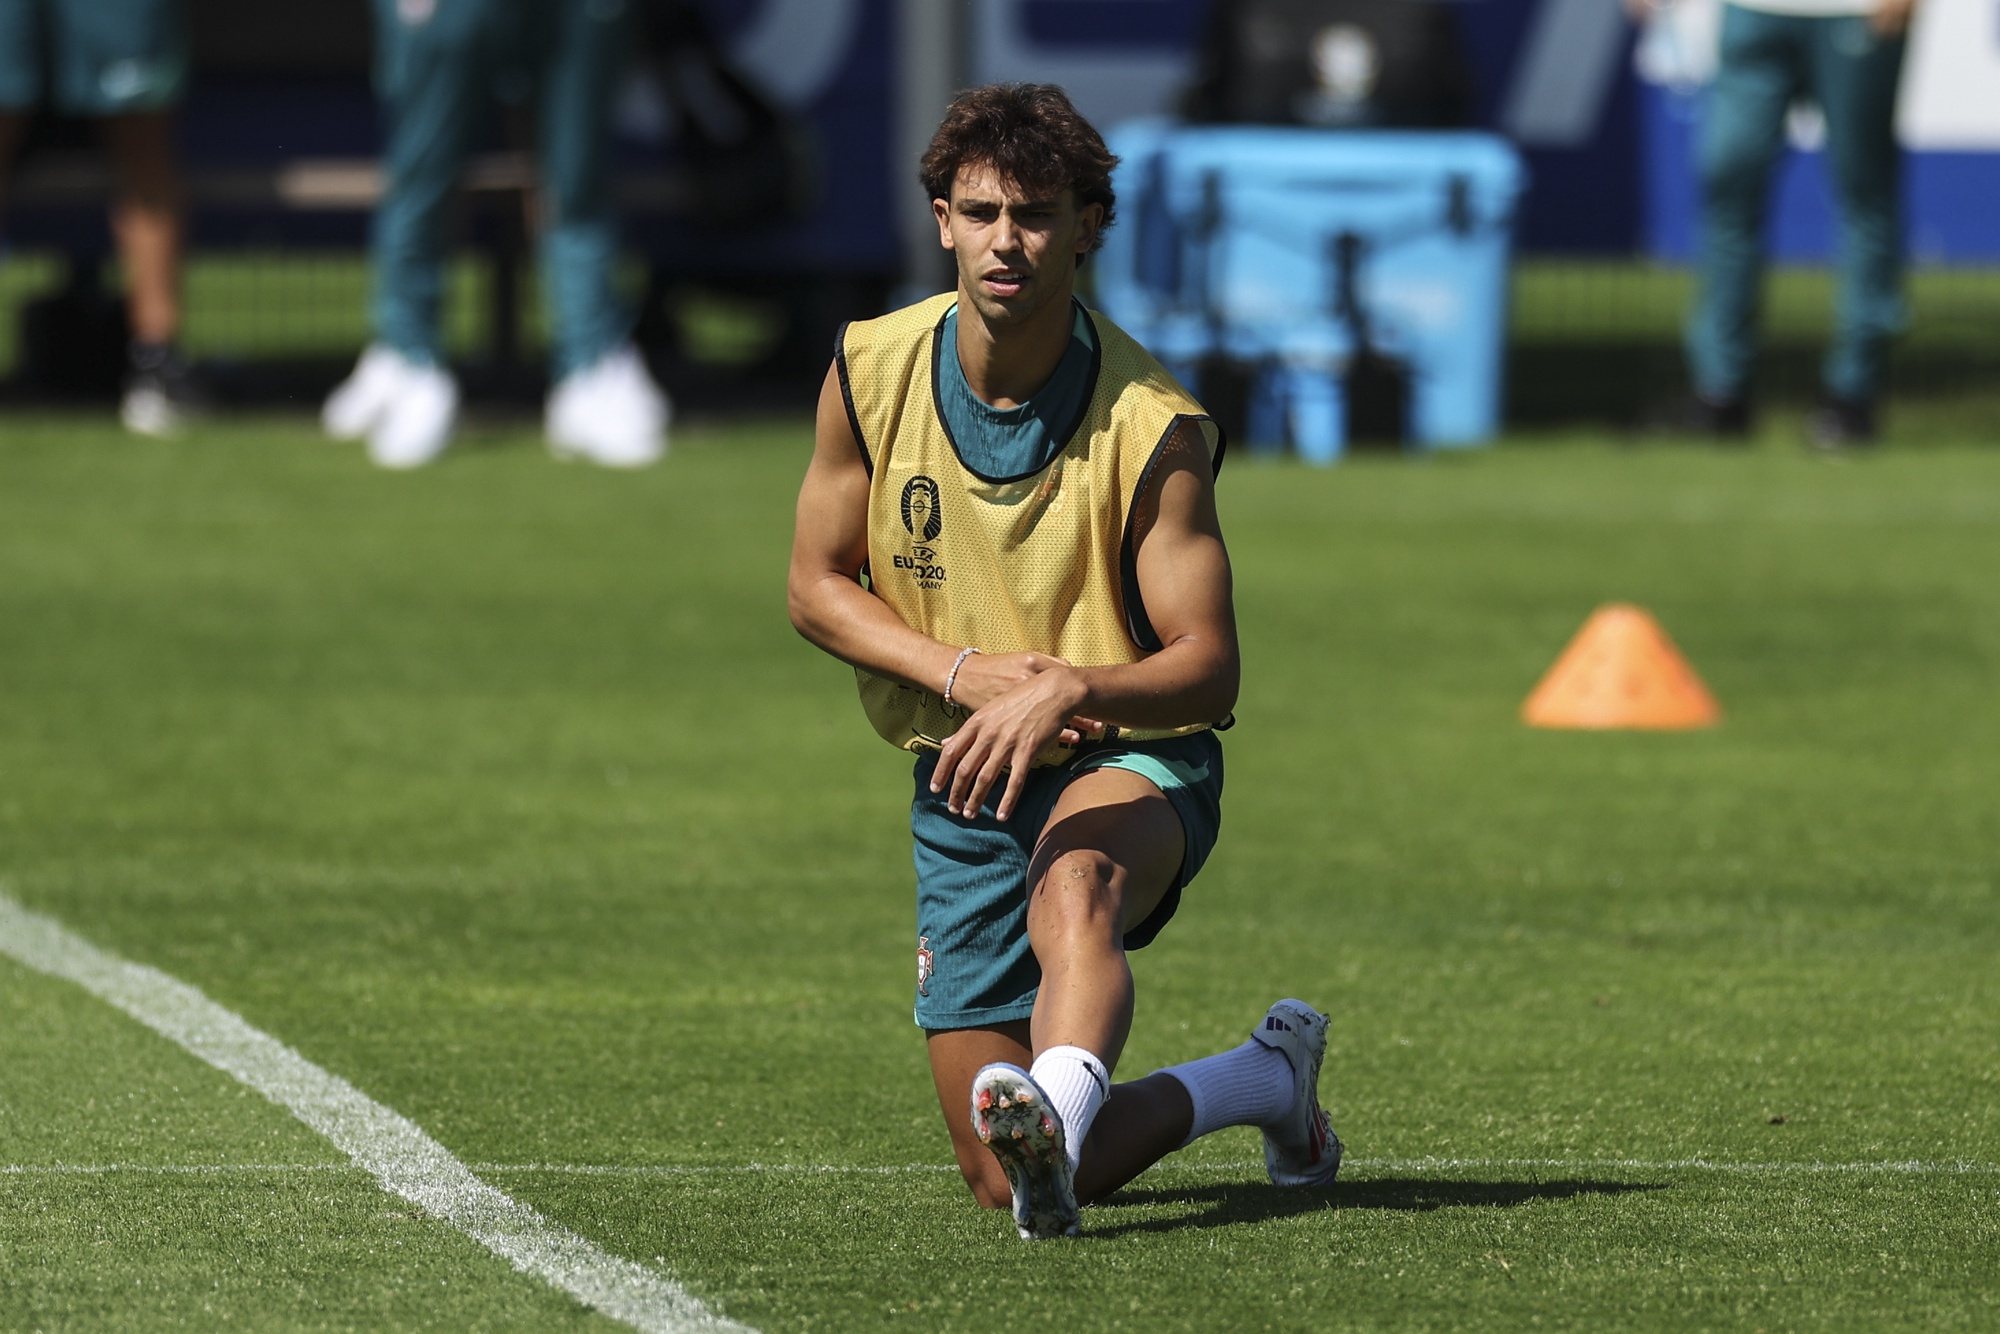 Portugal national soccer team player João Felix during a training session in Marienfeld, Harsewinkel, Germany, 25 June 2024. The Portuguese national soccer team is based in Marienfeld, Harsewinkel during the UEFA EURO 2024. MIGUEL A. LOPES/LUSA